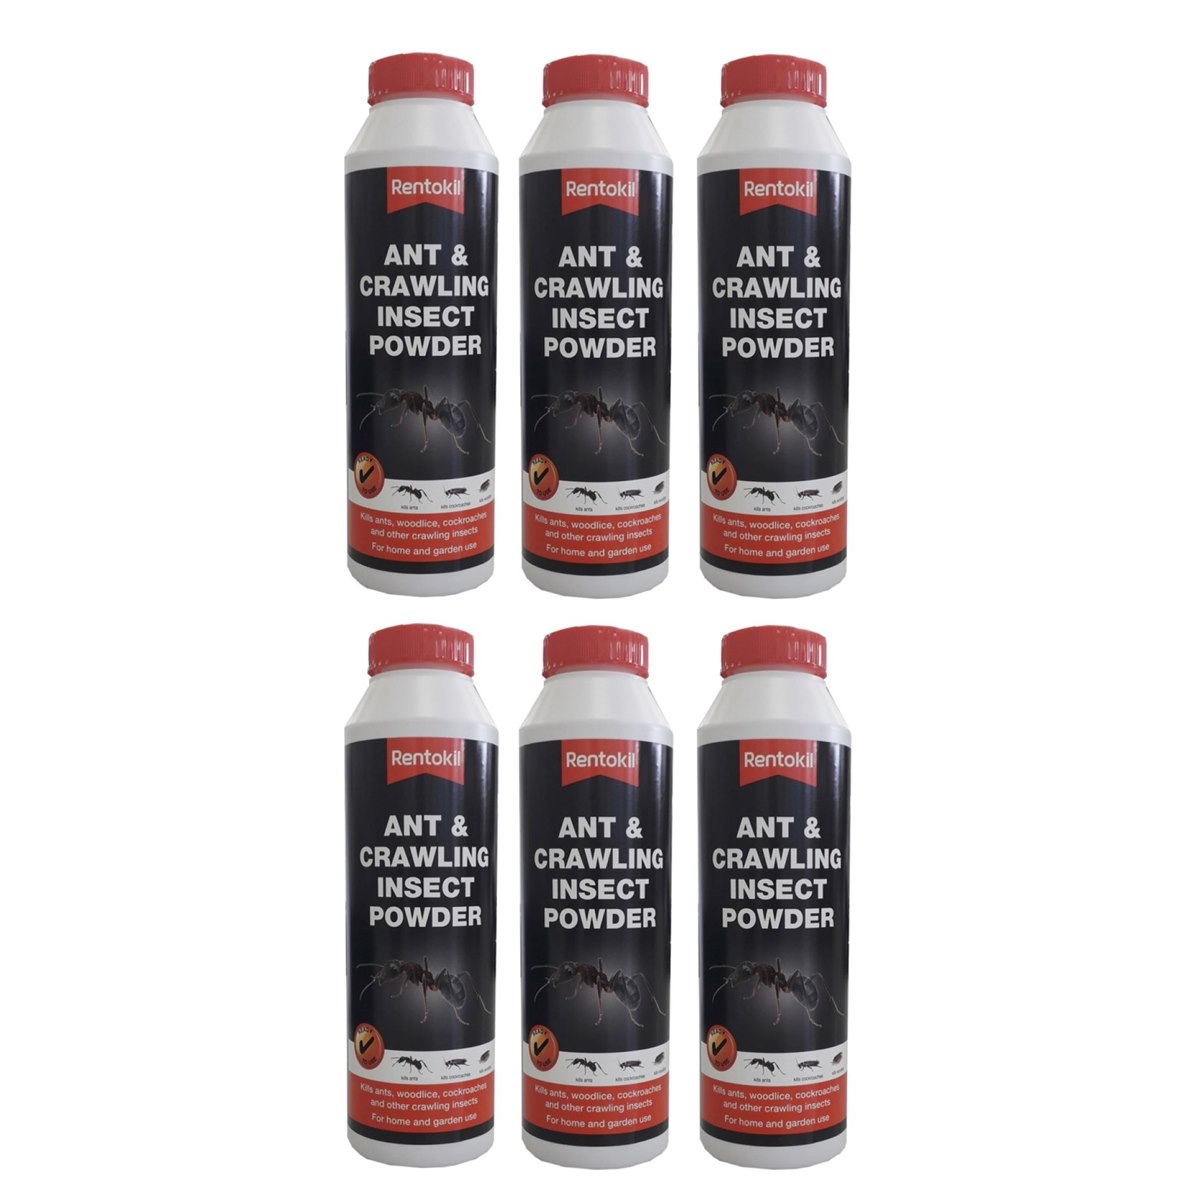 Case of 6 x Rentokil Ant and Crawling Insect Powder 300g